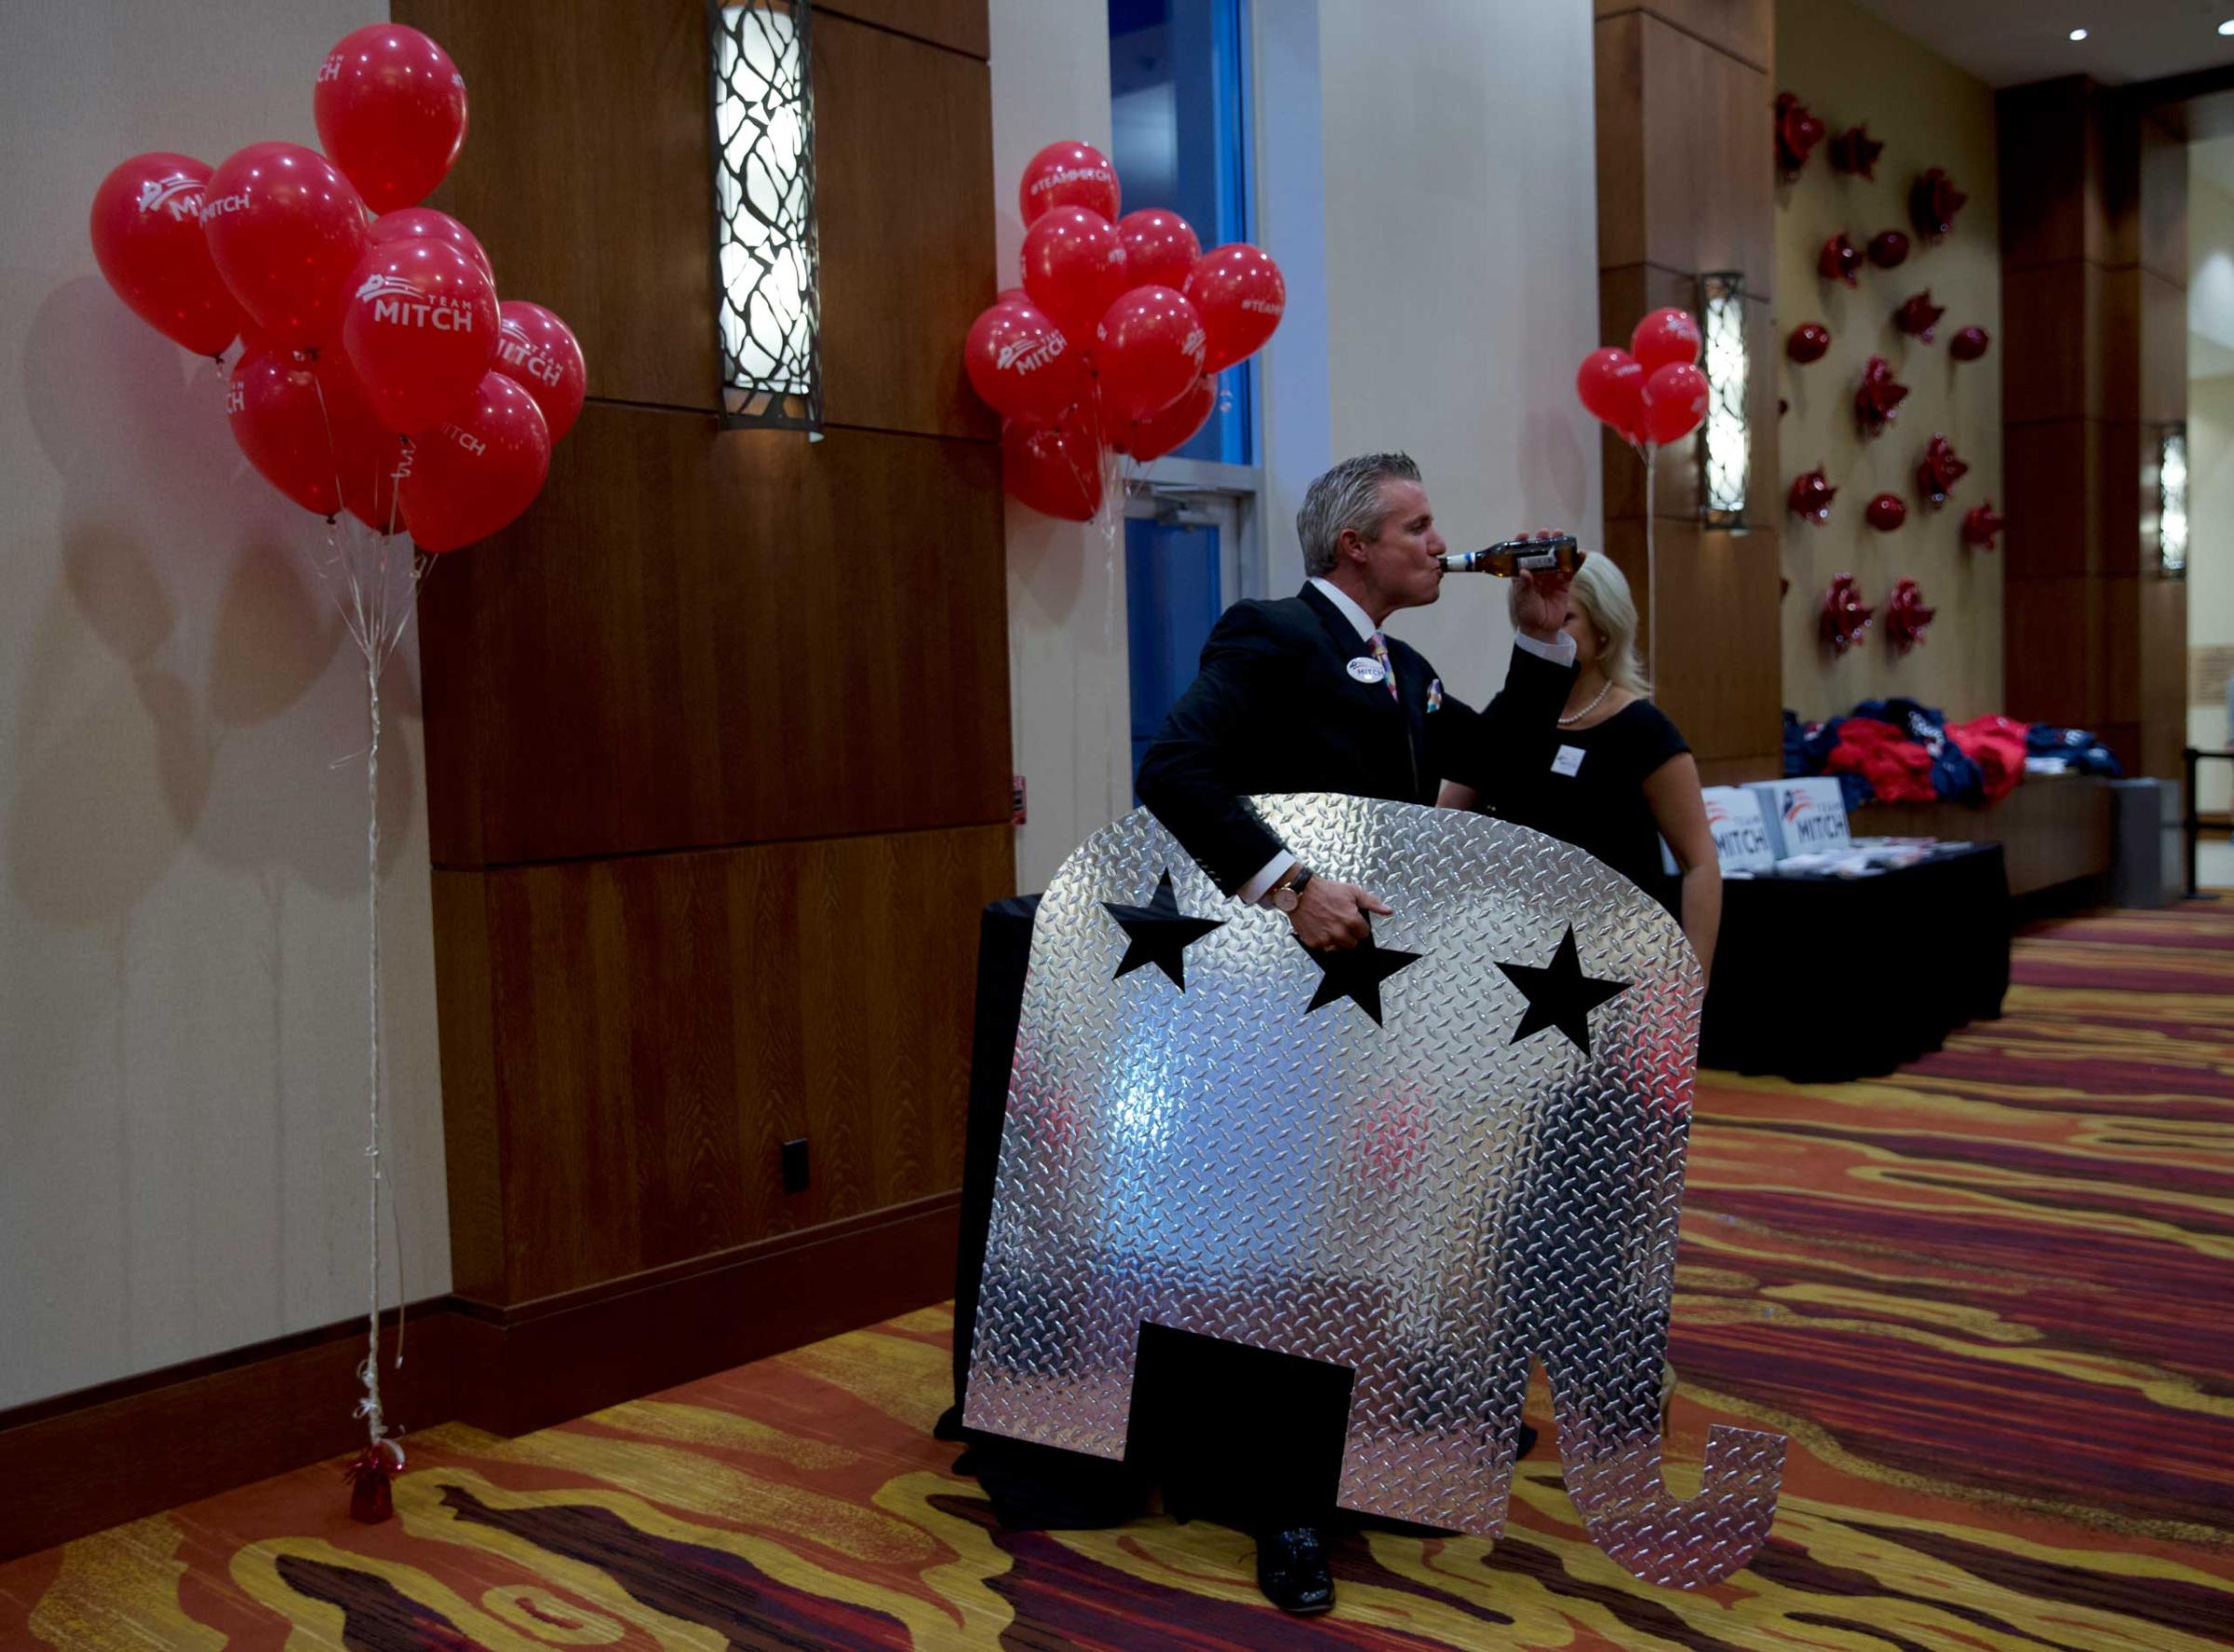 Supporters gather to celebrate incumbent Sen. Mitch McConnell's victory over Alison Lundergan Grimes at the Louisville Marriott East Hotel in Louisville, Ky. on Nov. 4, 2014. With the Republican takeover of the Senate, McConnell is expected to become the new Senate Majority Leader.